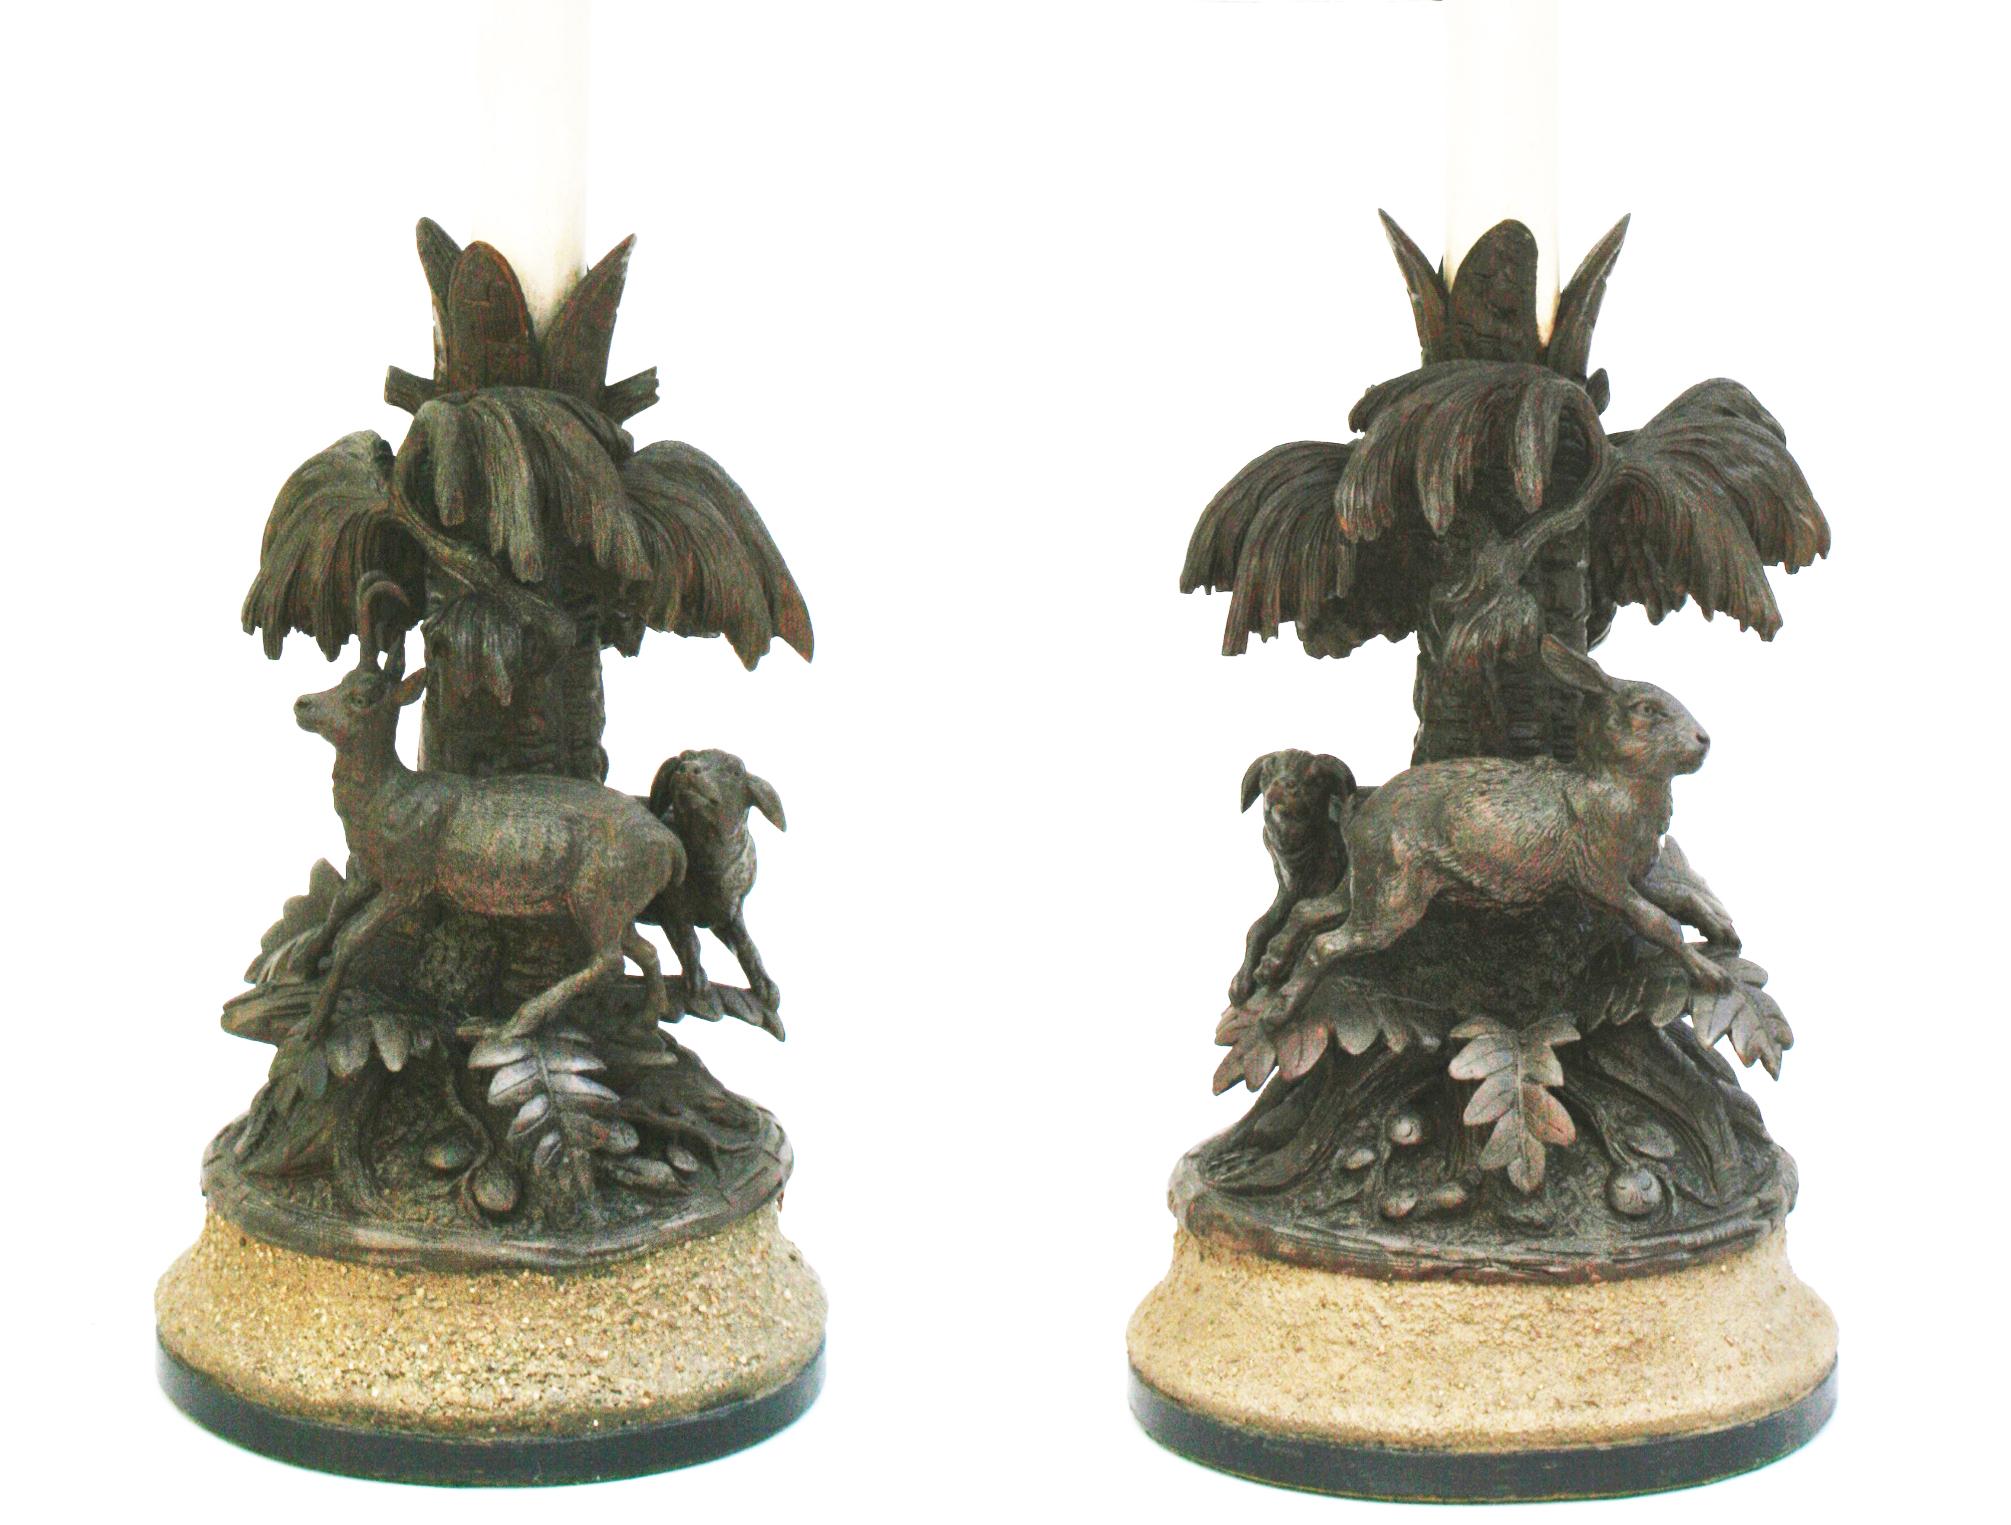 This pair of lamps is done in the unique Black Forest style, carved with a typical hunting theme. A hunting dog chases a hare around one base and chases a deer on the other. Both are decorated with typical maple leaves and acorns. A unique pair of